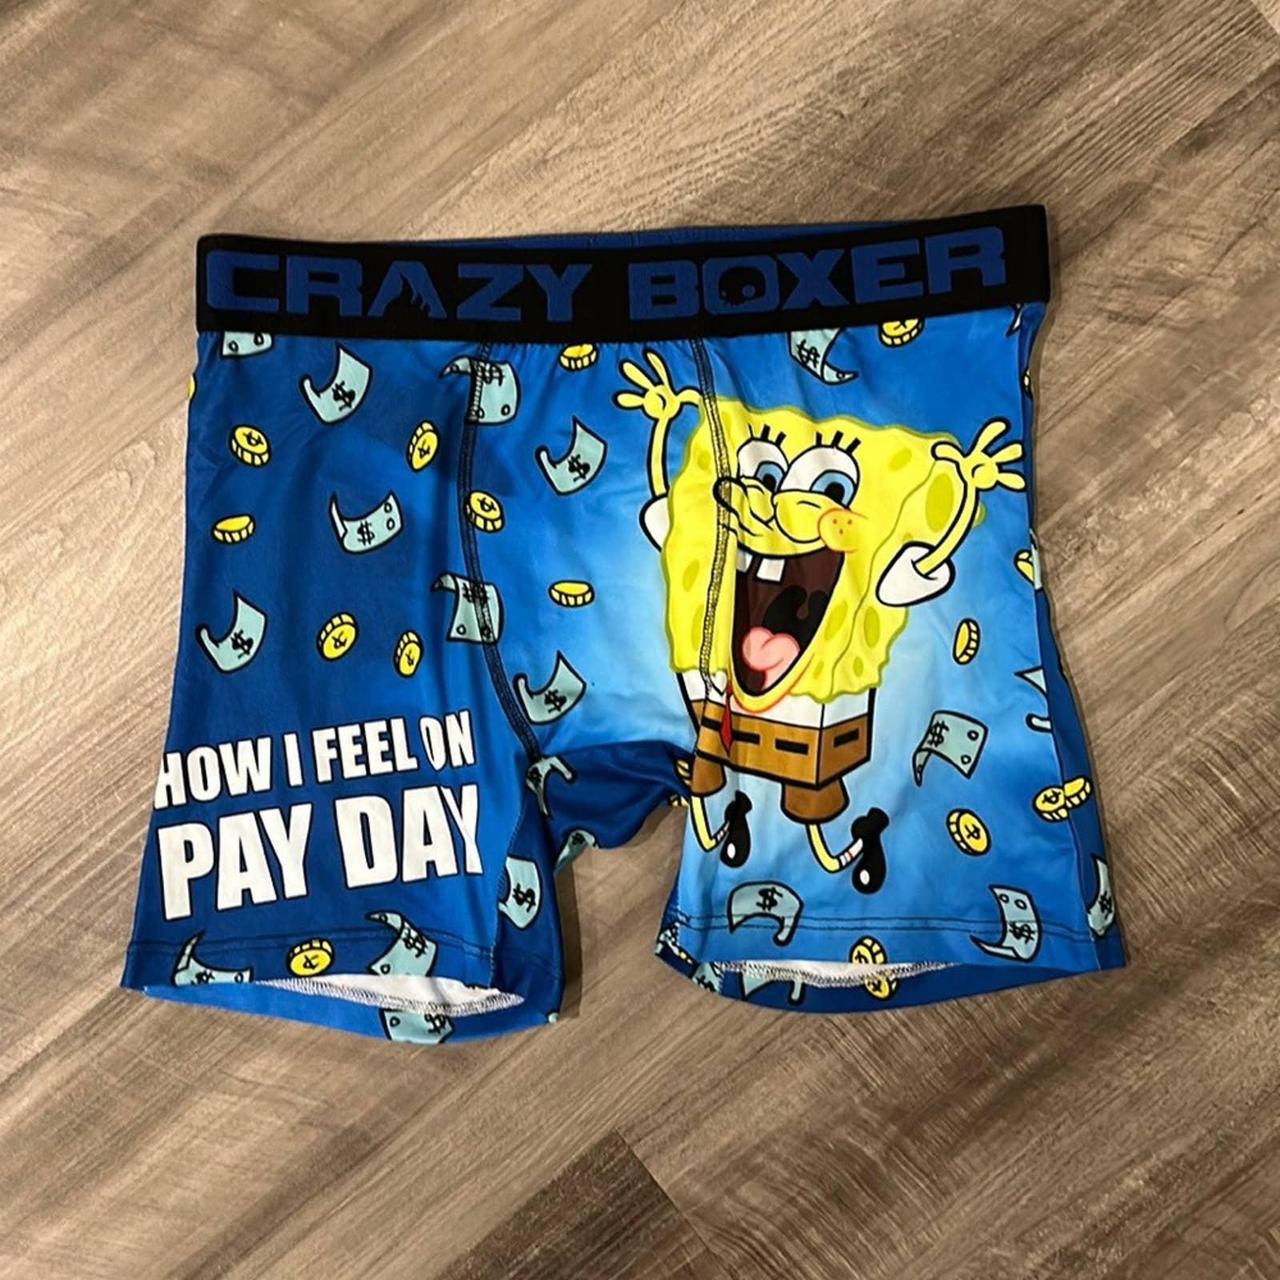 item listed by undiefunday